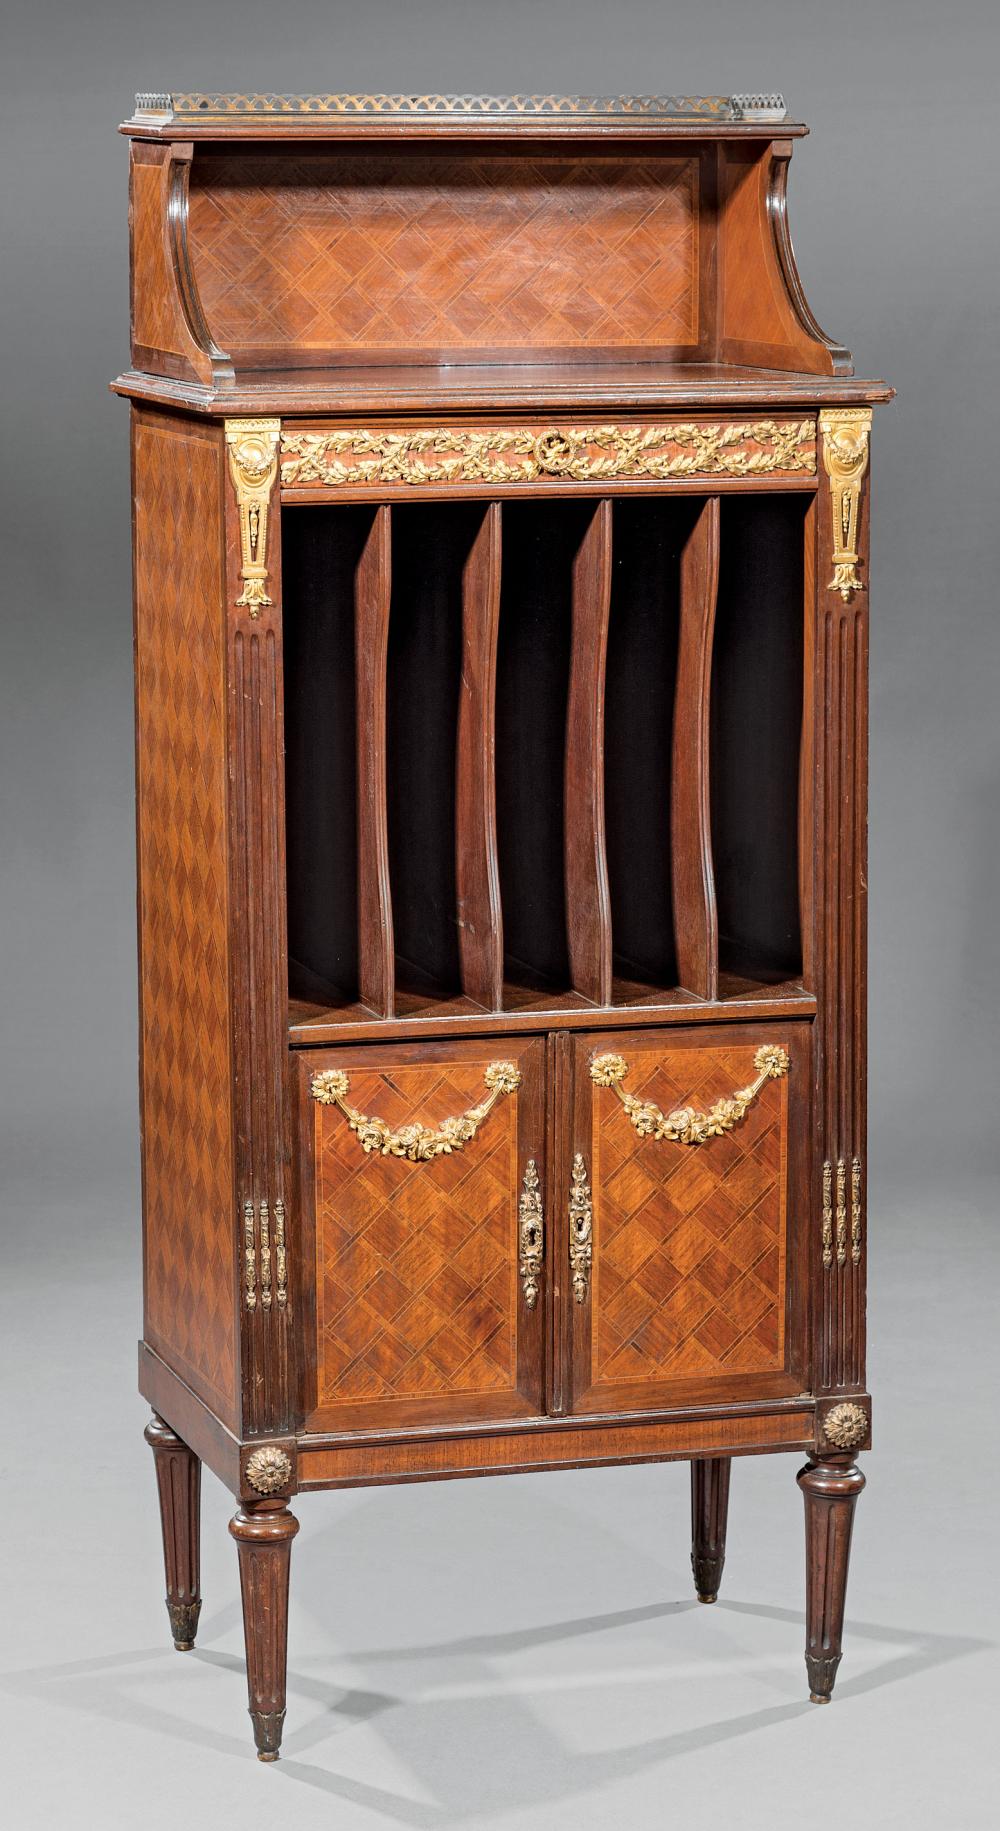 PARQUETRY, GILT-MOUNTED MUSIC CABINETLouis